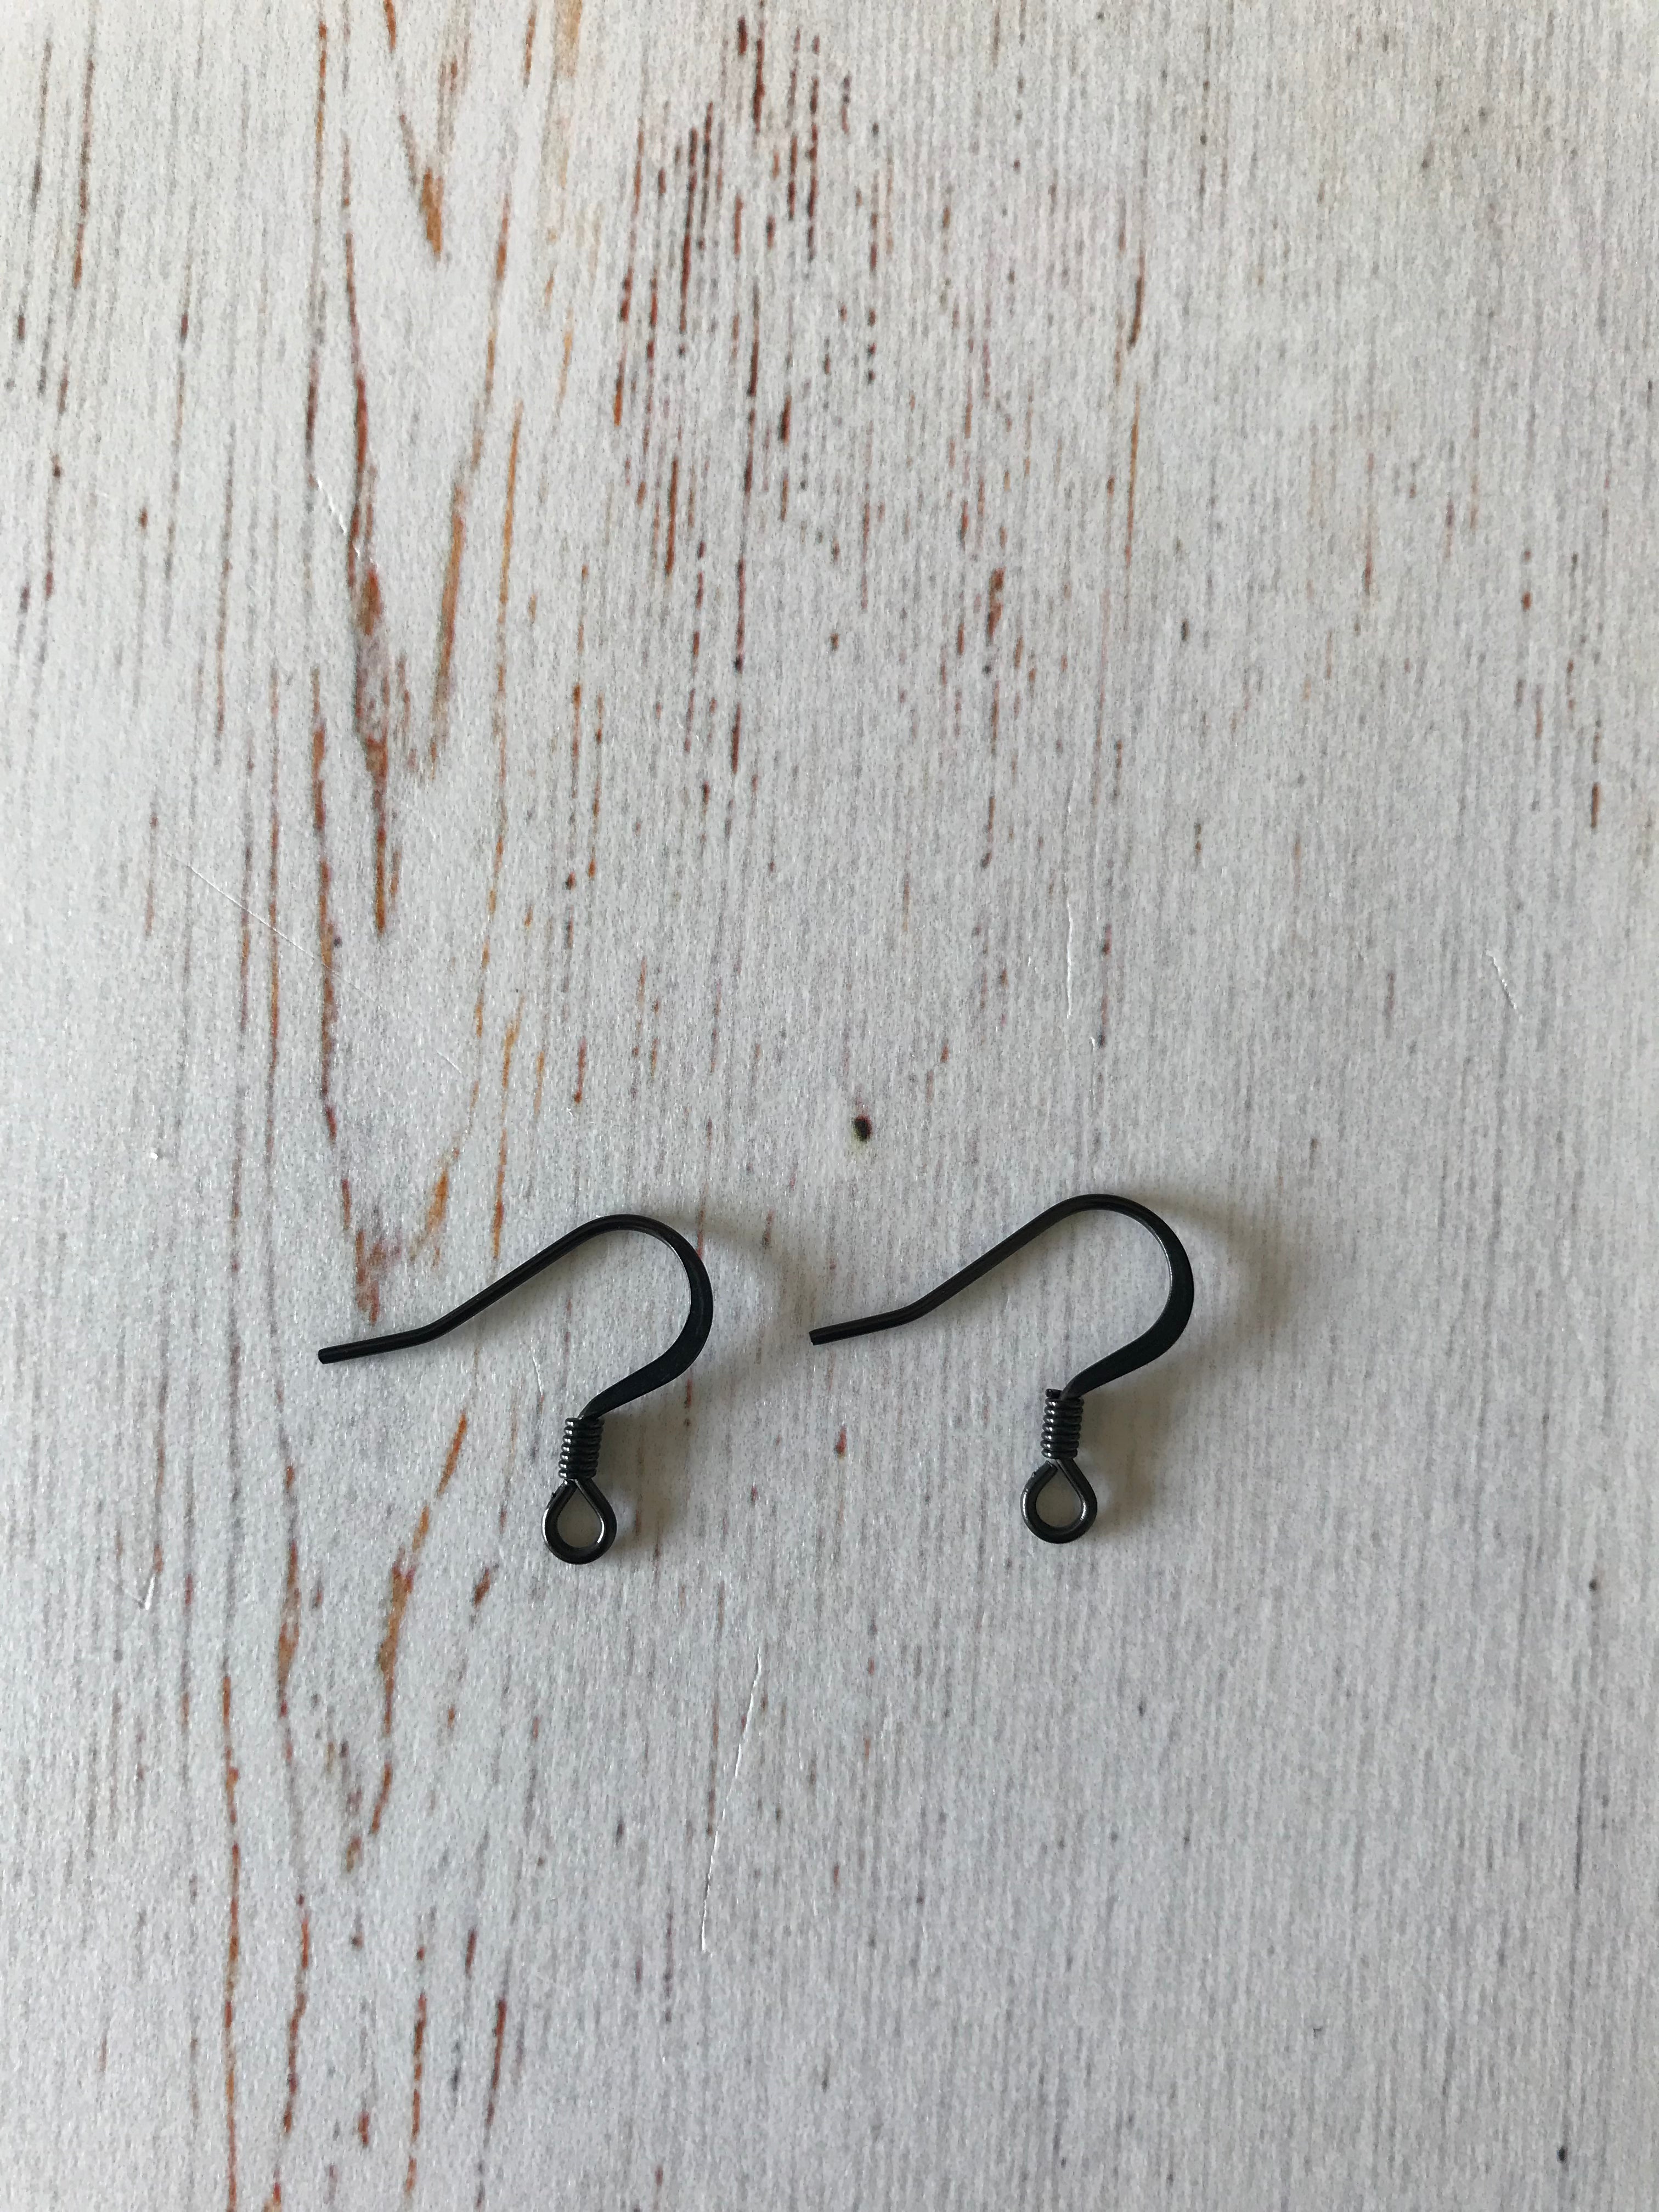 304 Surgical Stainless Steel Black Electrophoresis French Earring Hooks (1 PAIR)